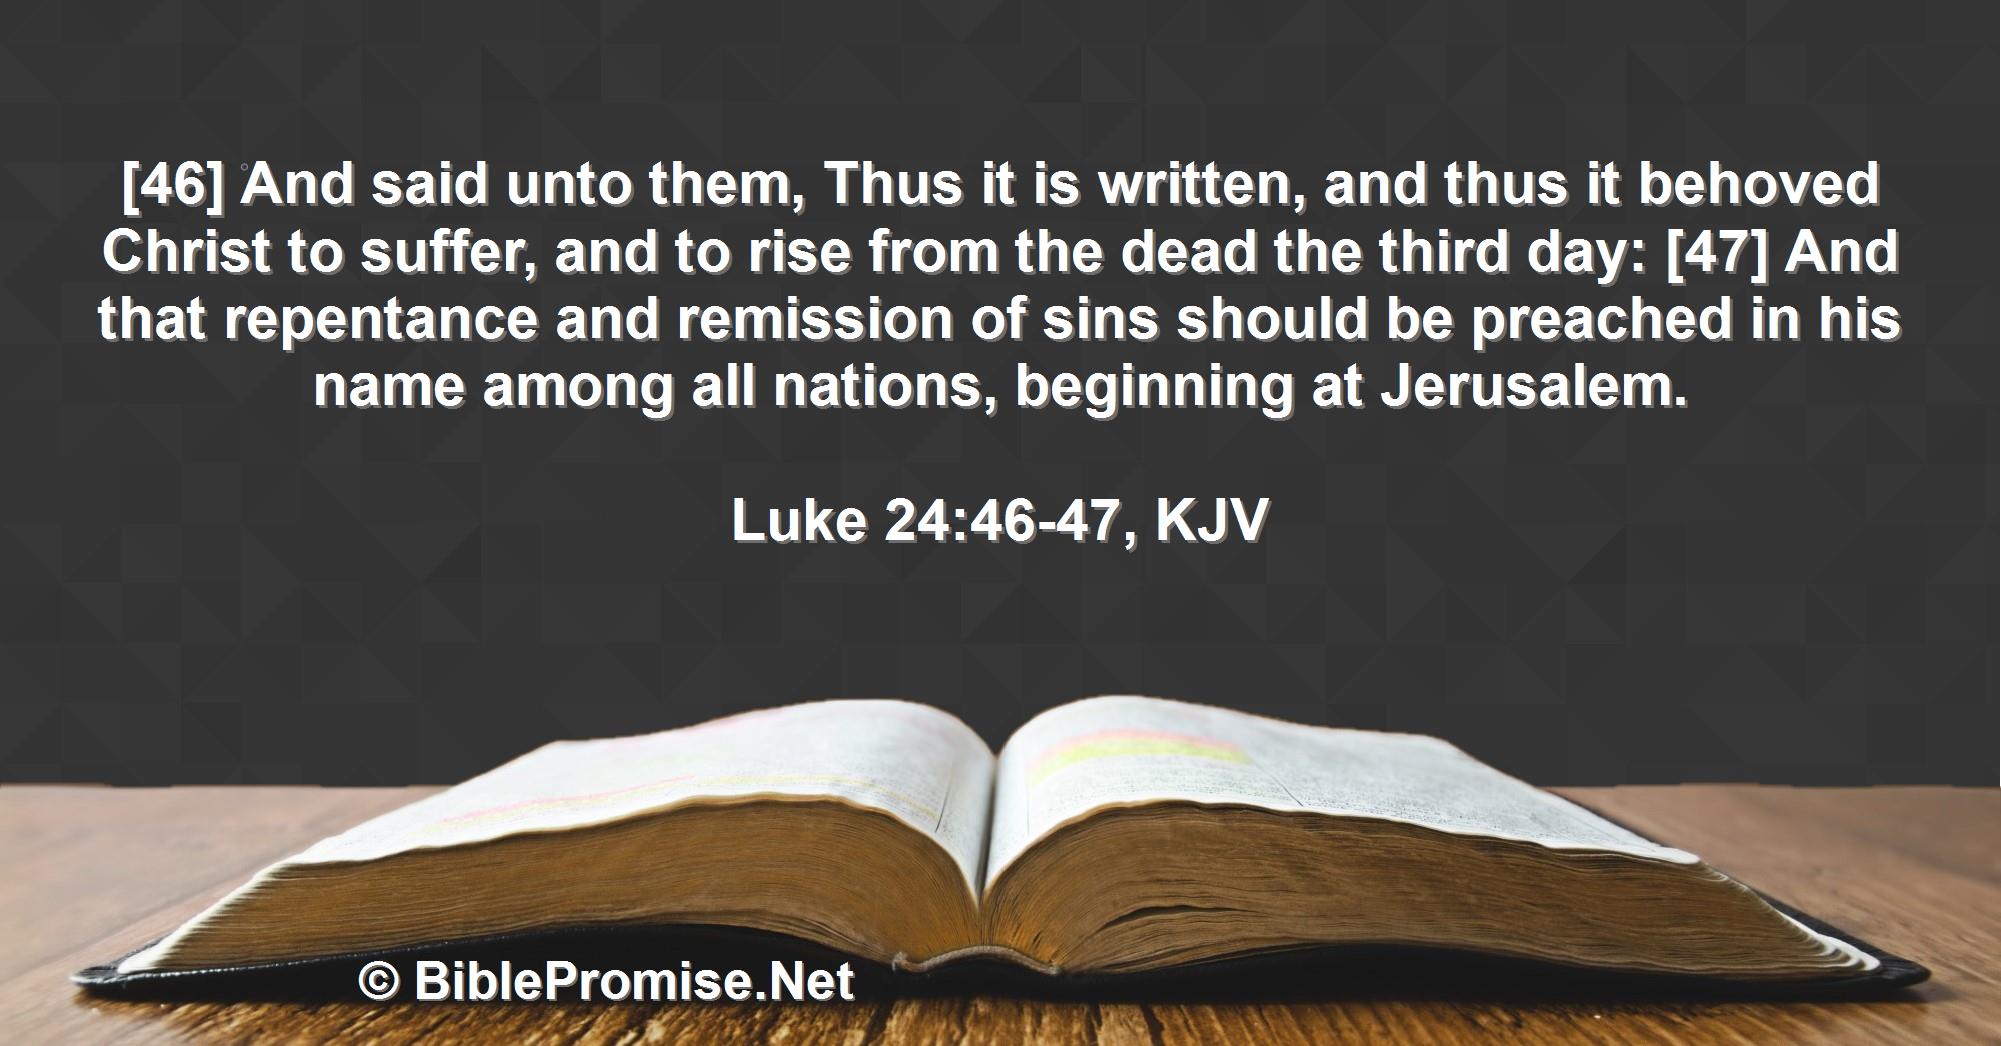 Sunday, September 25, 2022 - Luke 24:46-47 (KJV) - Bible promise that repentance and remission of sins should be preached in Jesus name among all nations.